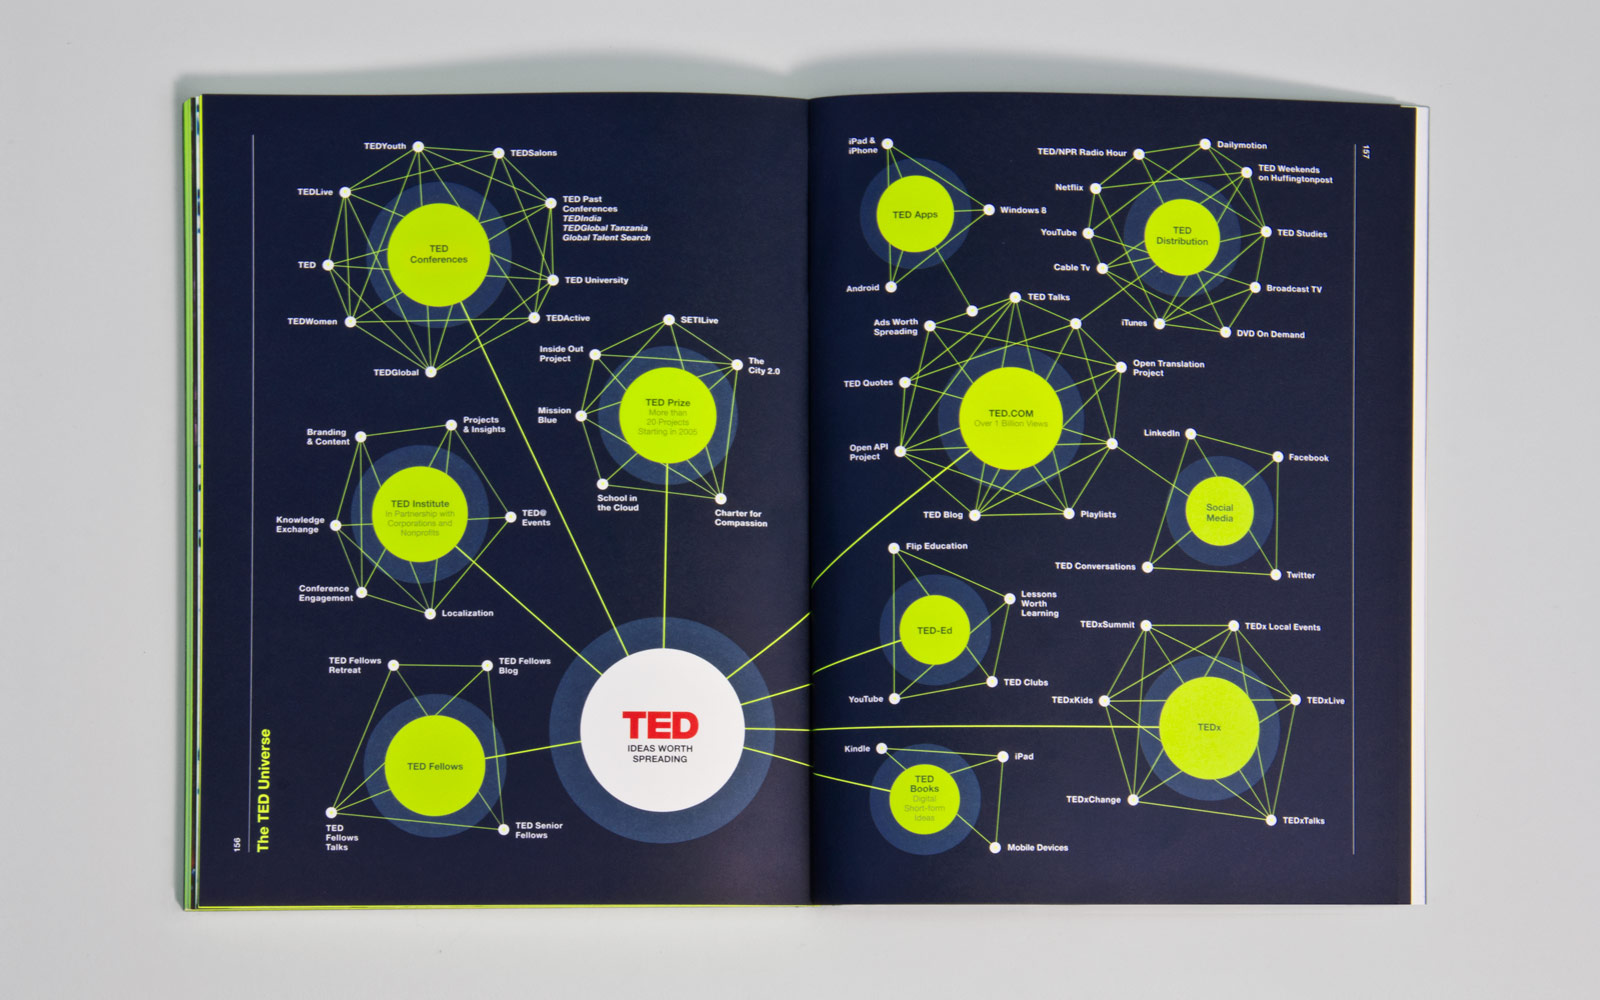 TED_global2013_web_universe